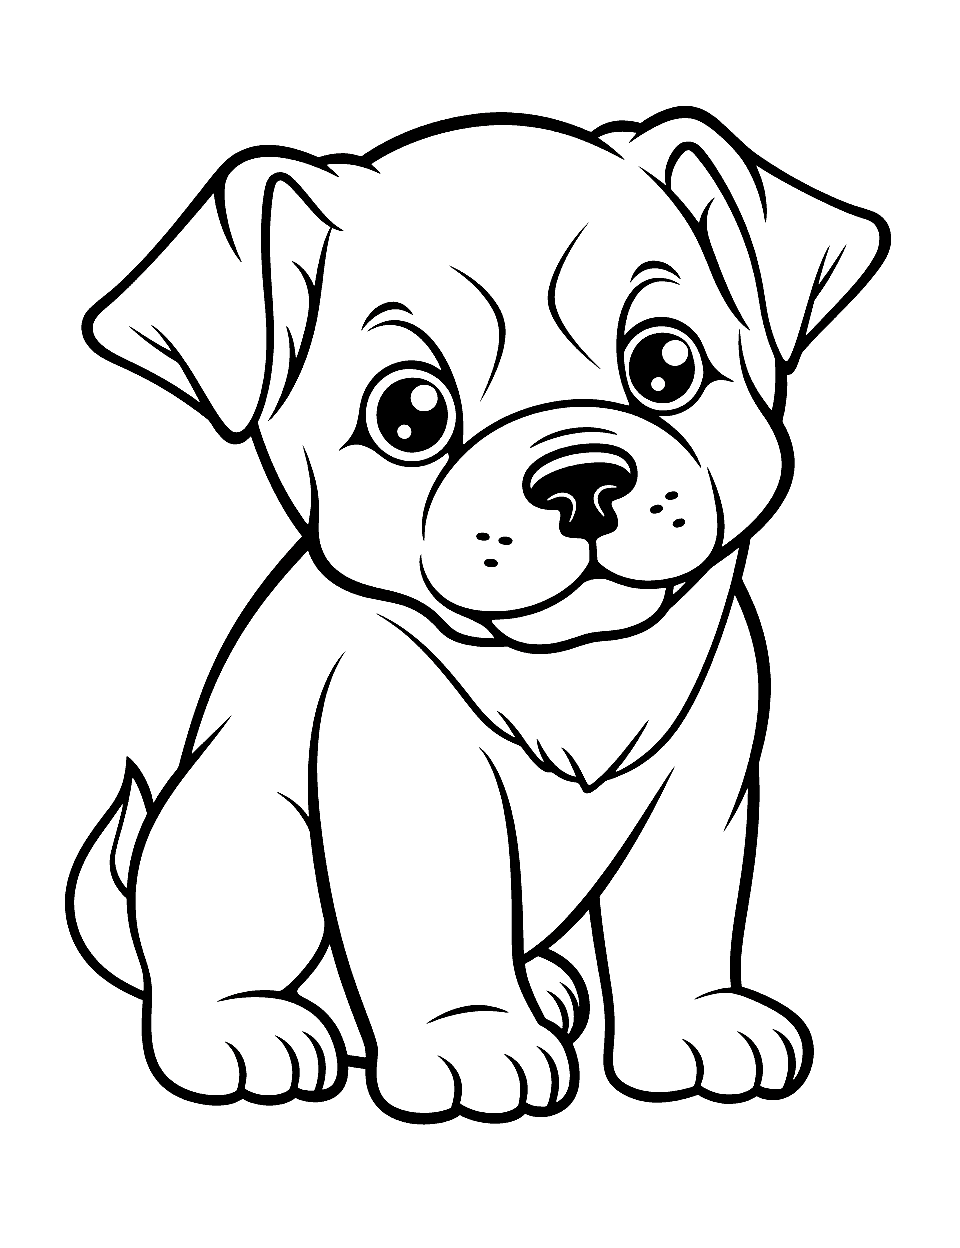 Super Cute Kawaii Bulldog Puppy Coloring Page - A kawaii-style Bulldog puppy, perfect for younger children to color.